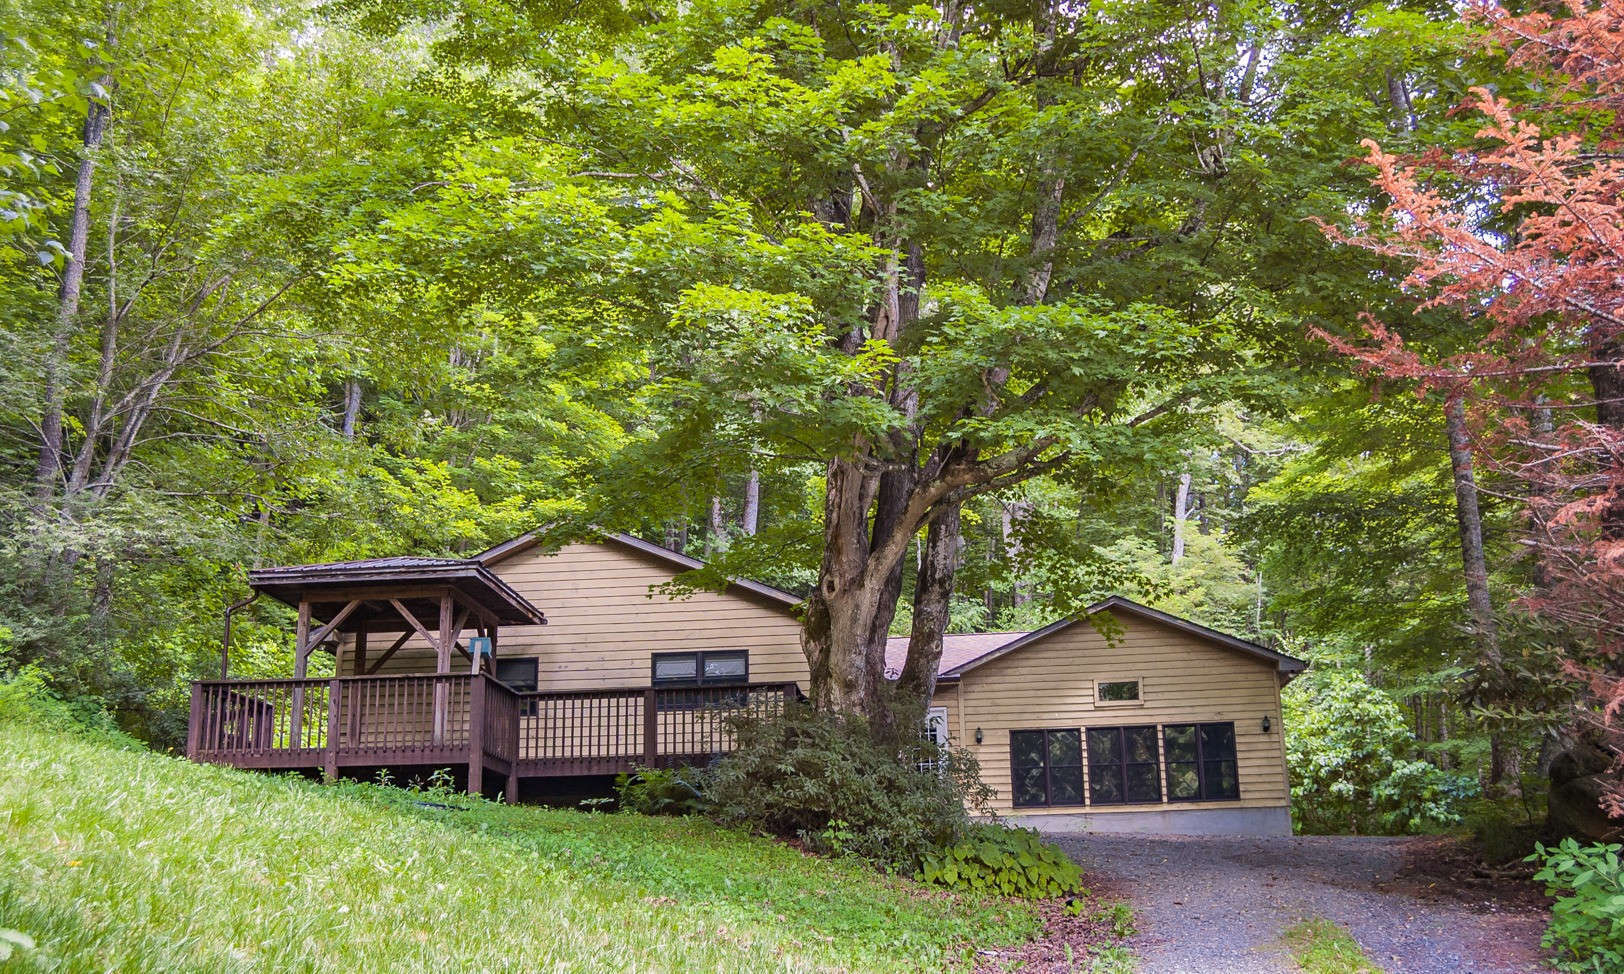 This 3-bedroom, 2-bath traditional style home offers a great Southern Ashe County NC location convenient to Boone, West Jefferson, and many  NC High Country  destinations.